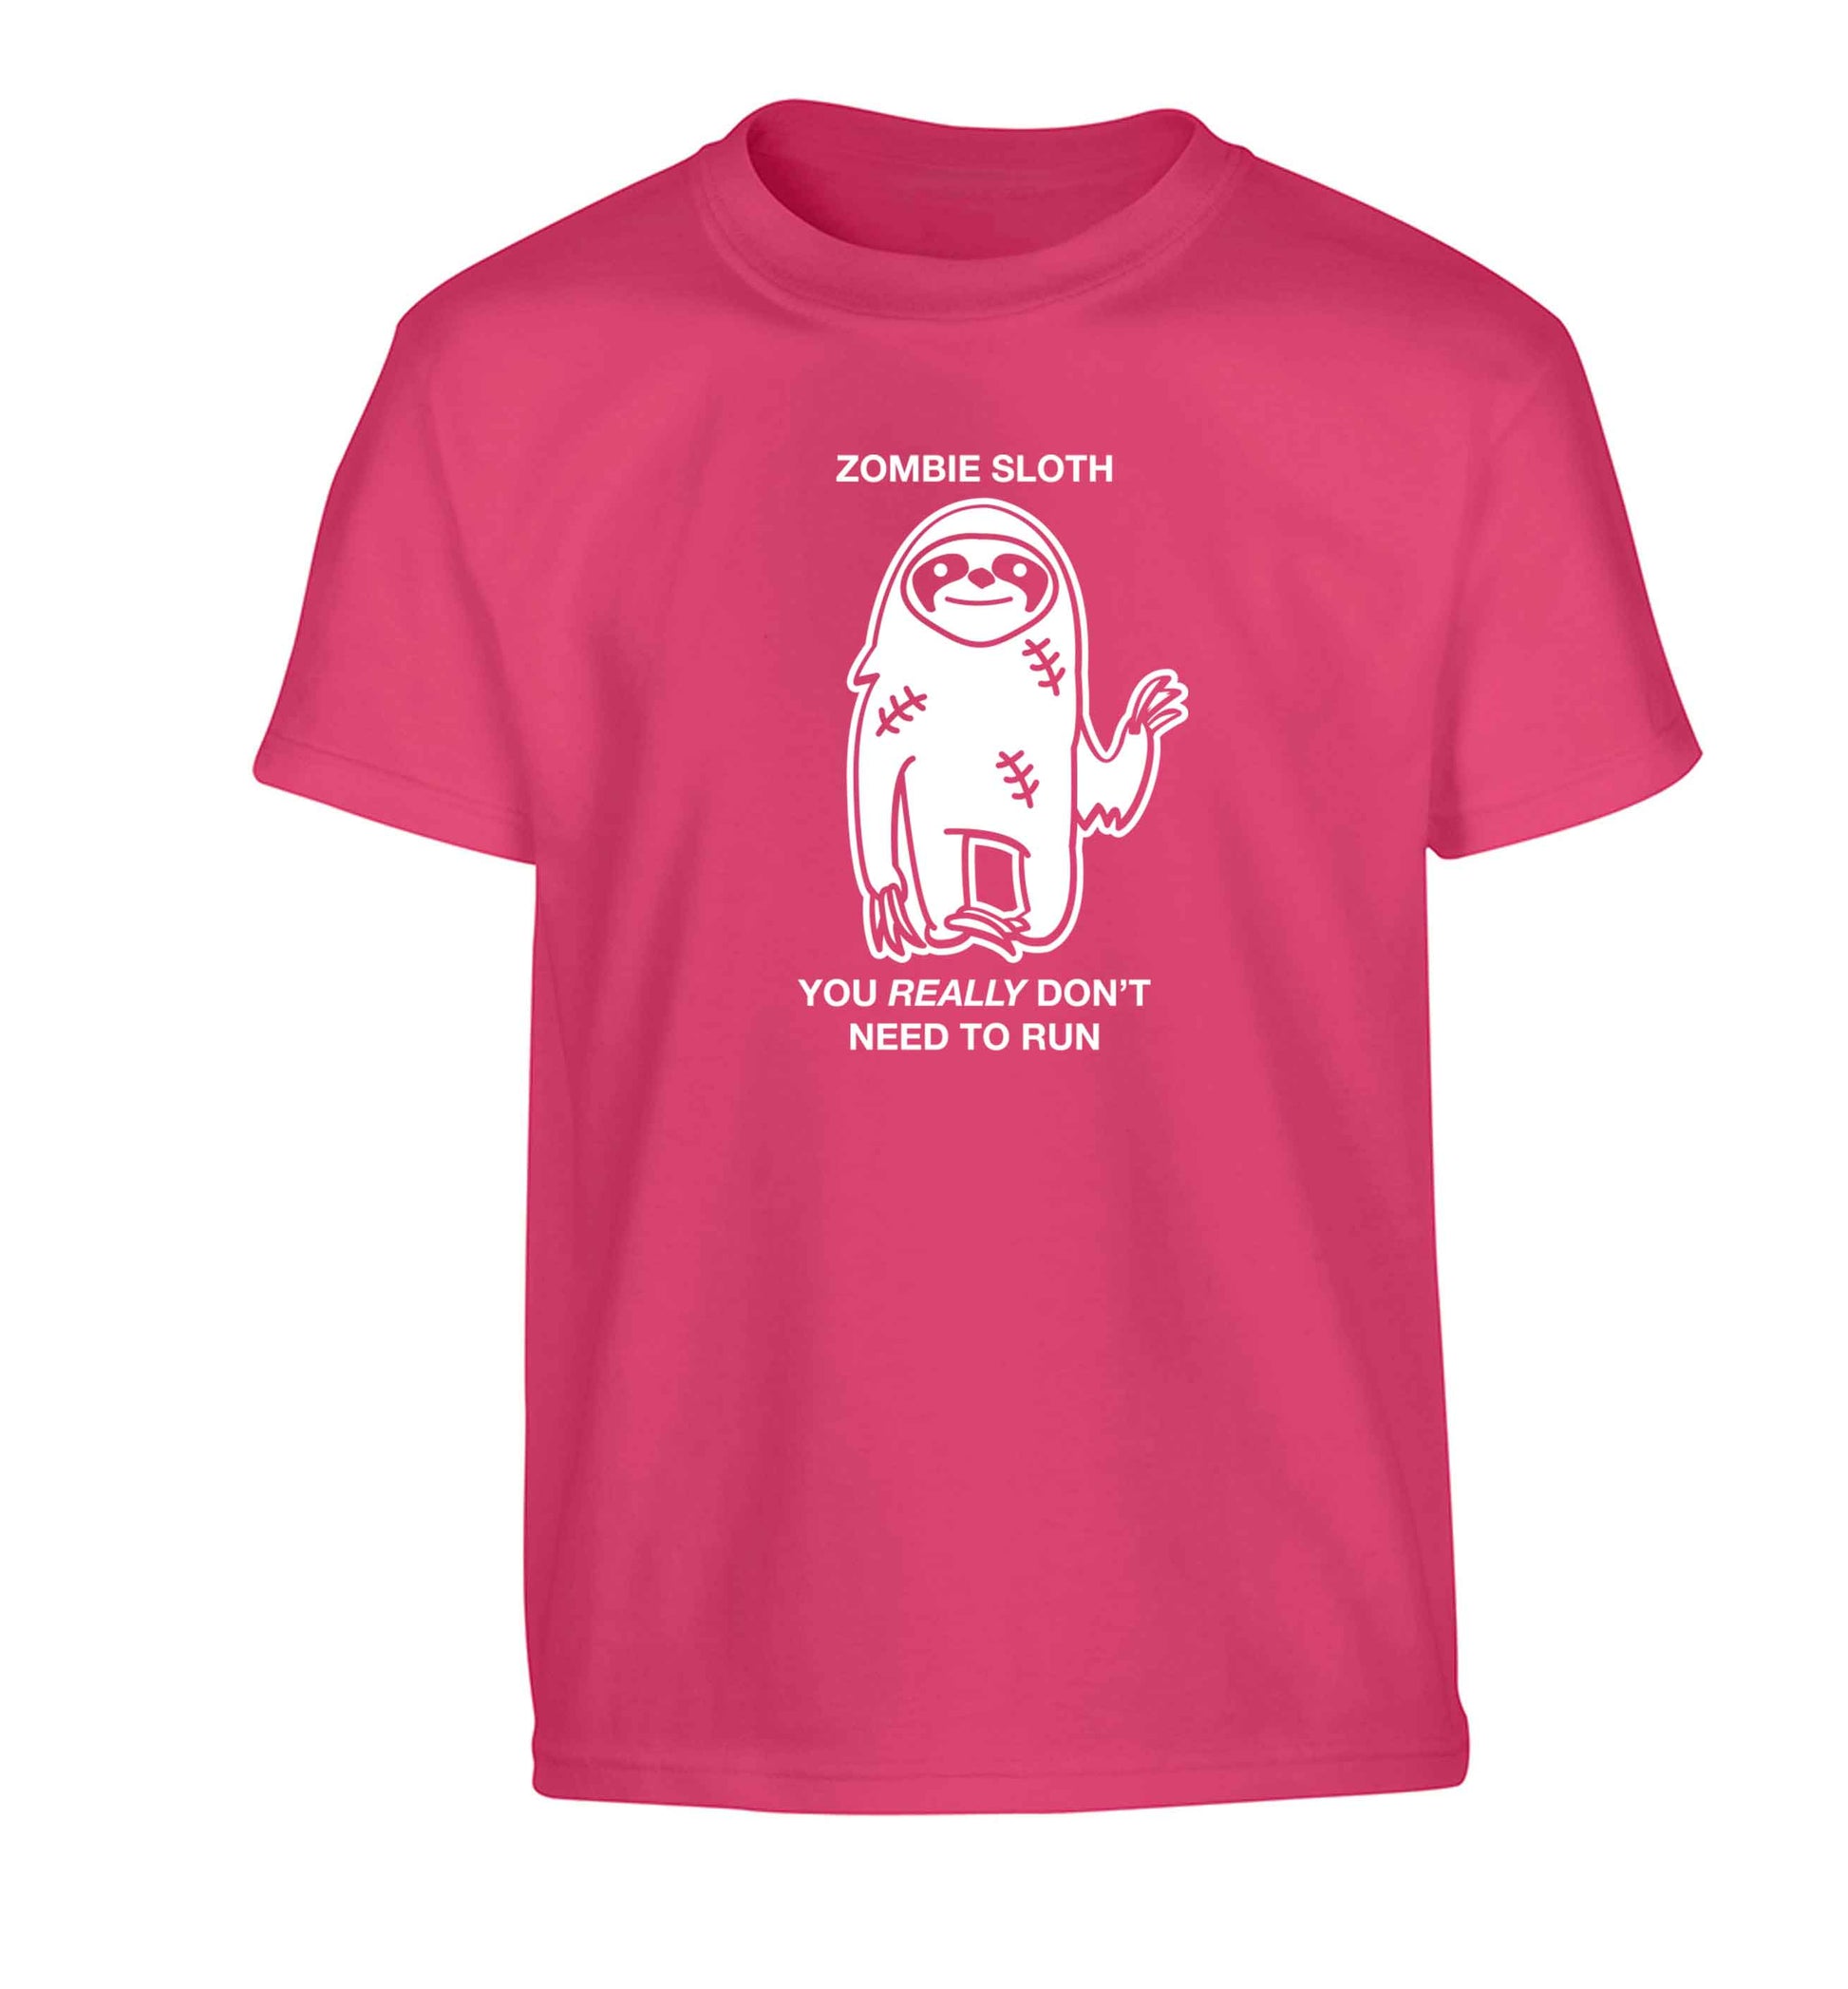 Zombie sloth you really don't need to run Children's pink Tshirt 12-13 Years